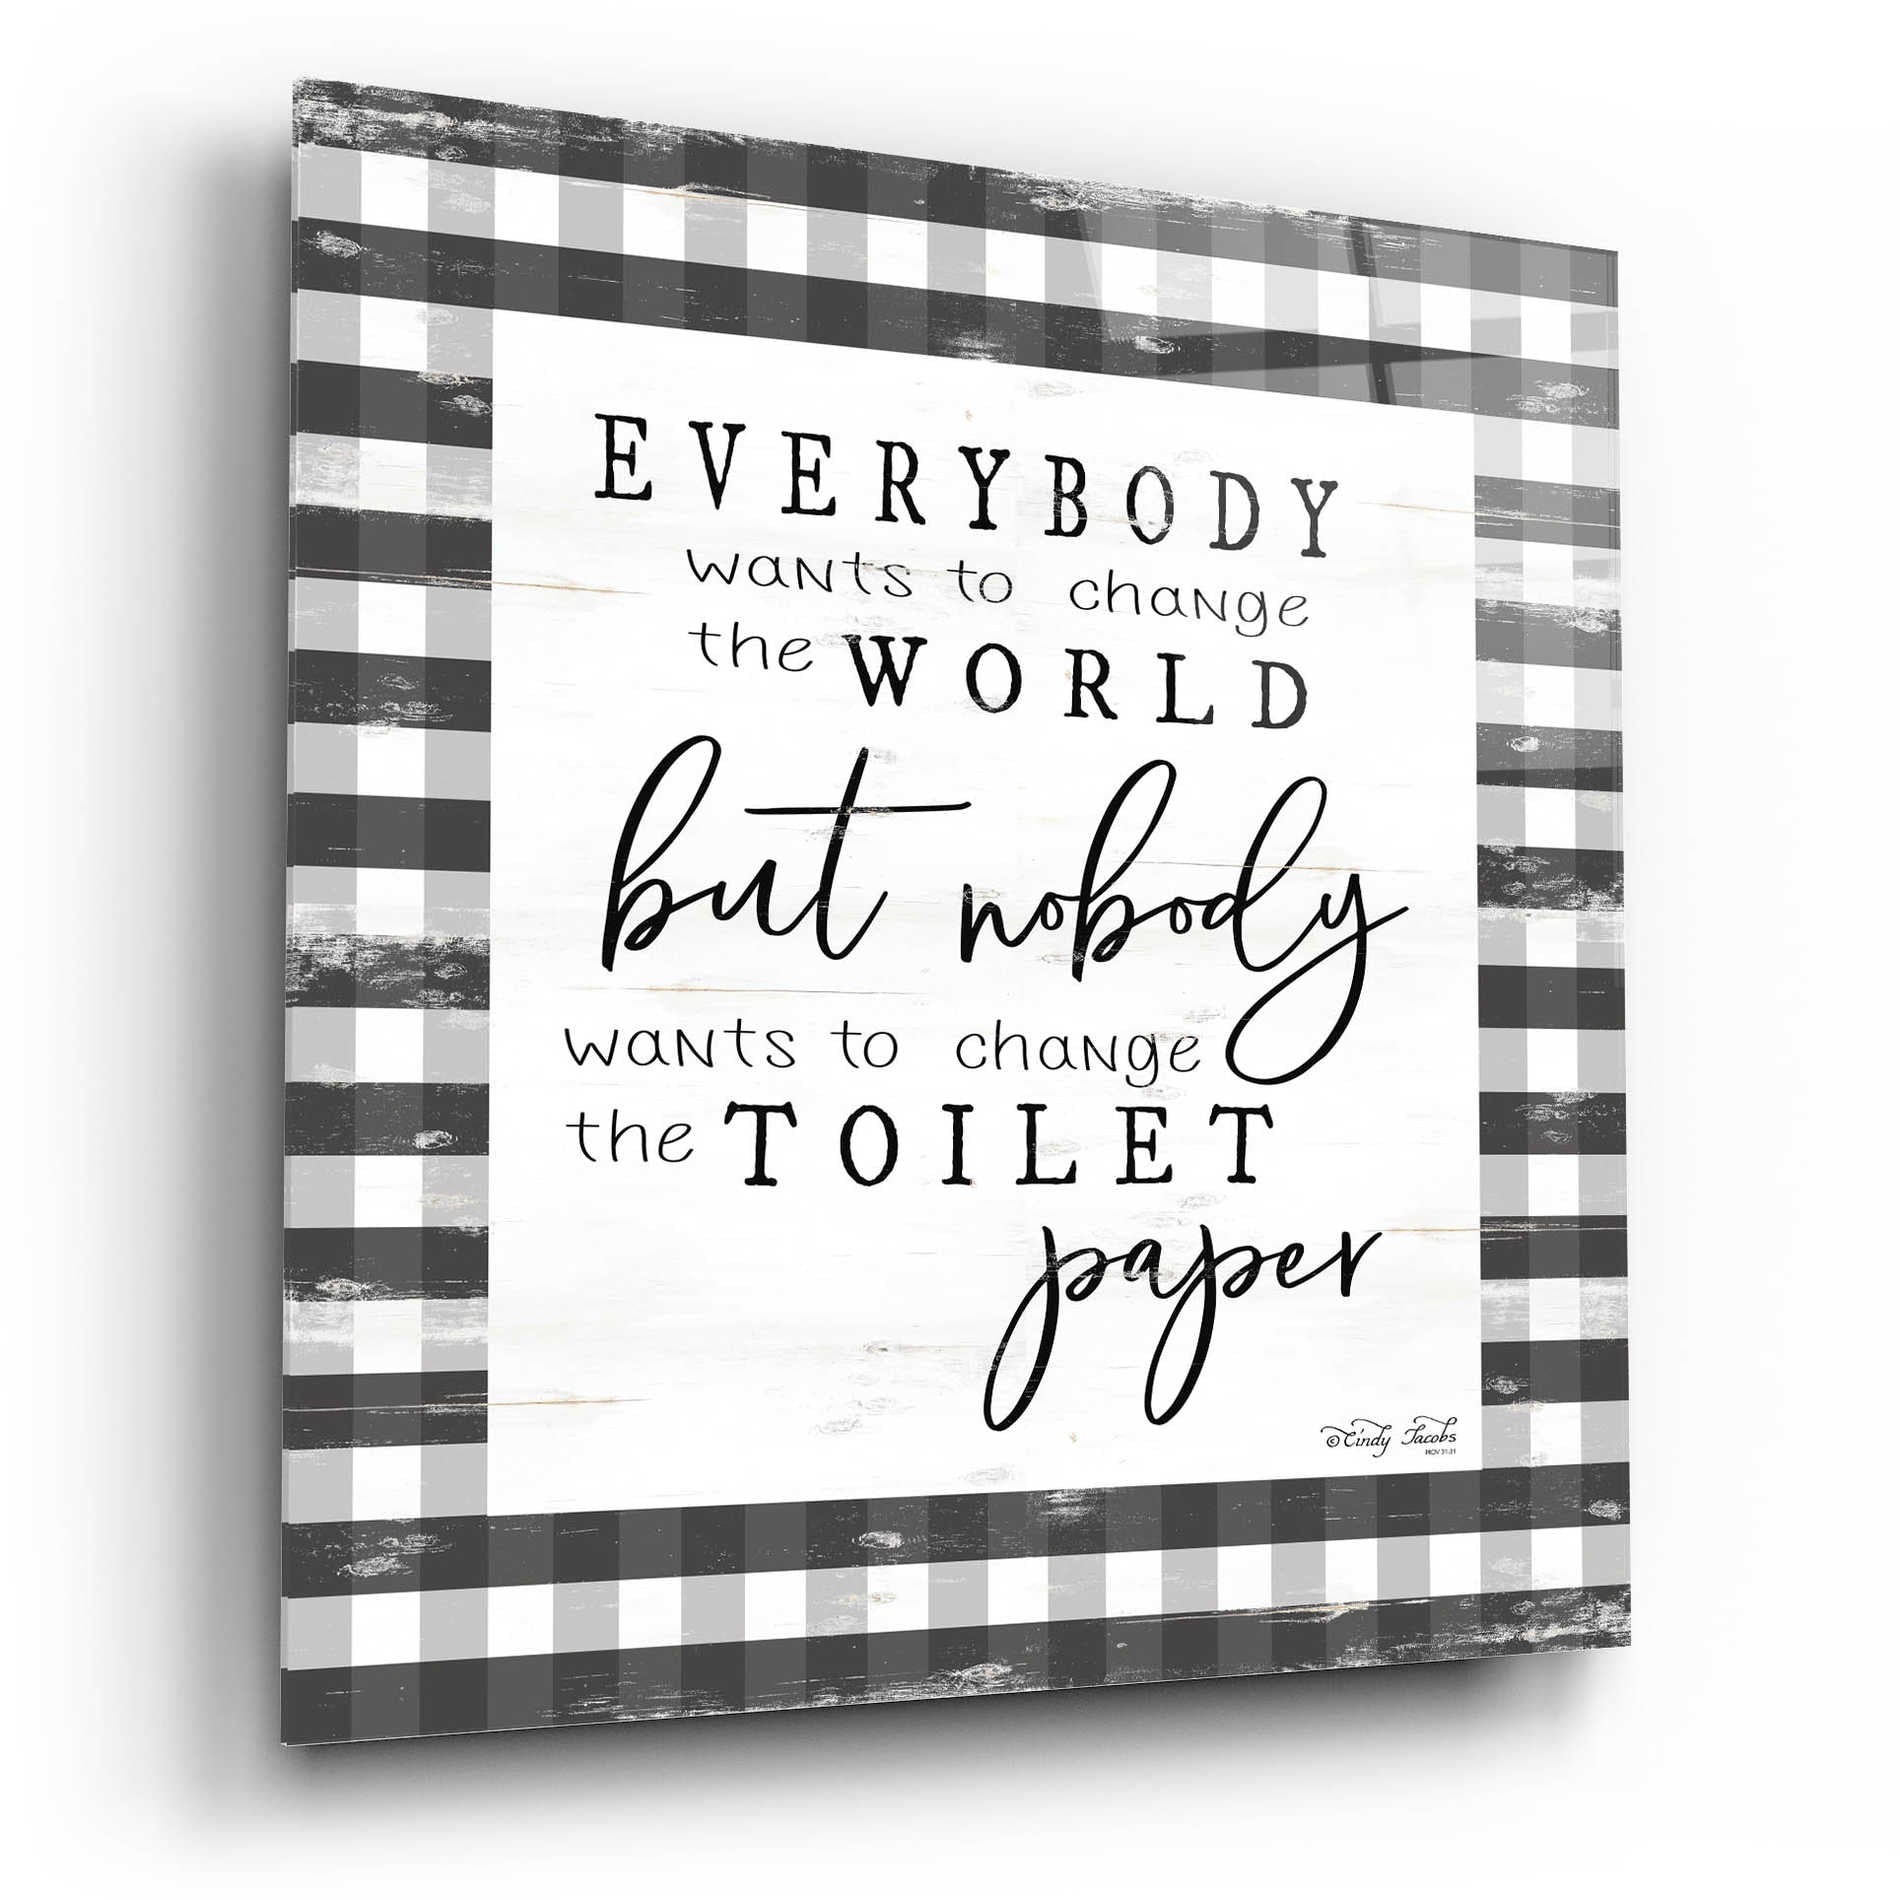 Epic Art 'Everybody Wants to Change the World' by Cindy Jacobs, Acrylic Glass Wall Art,12x12